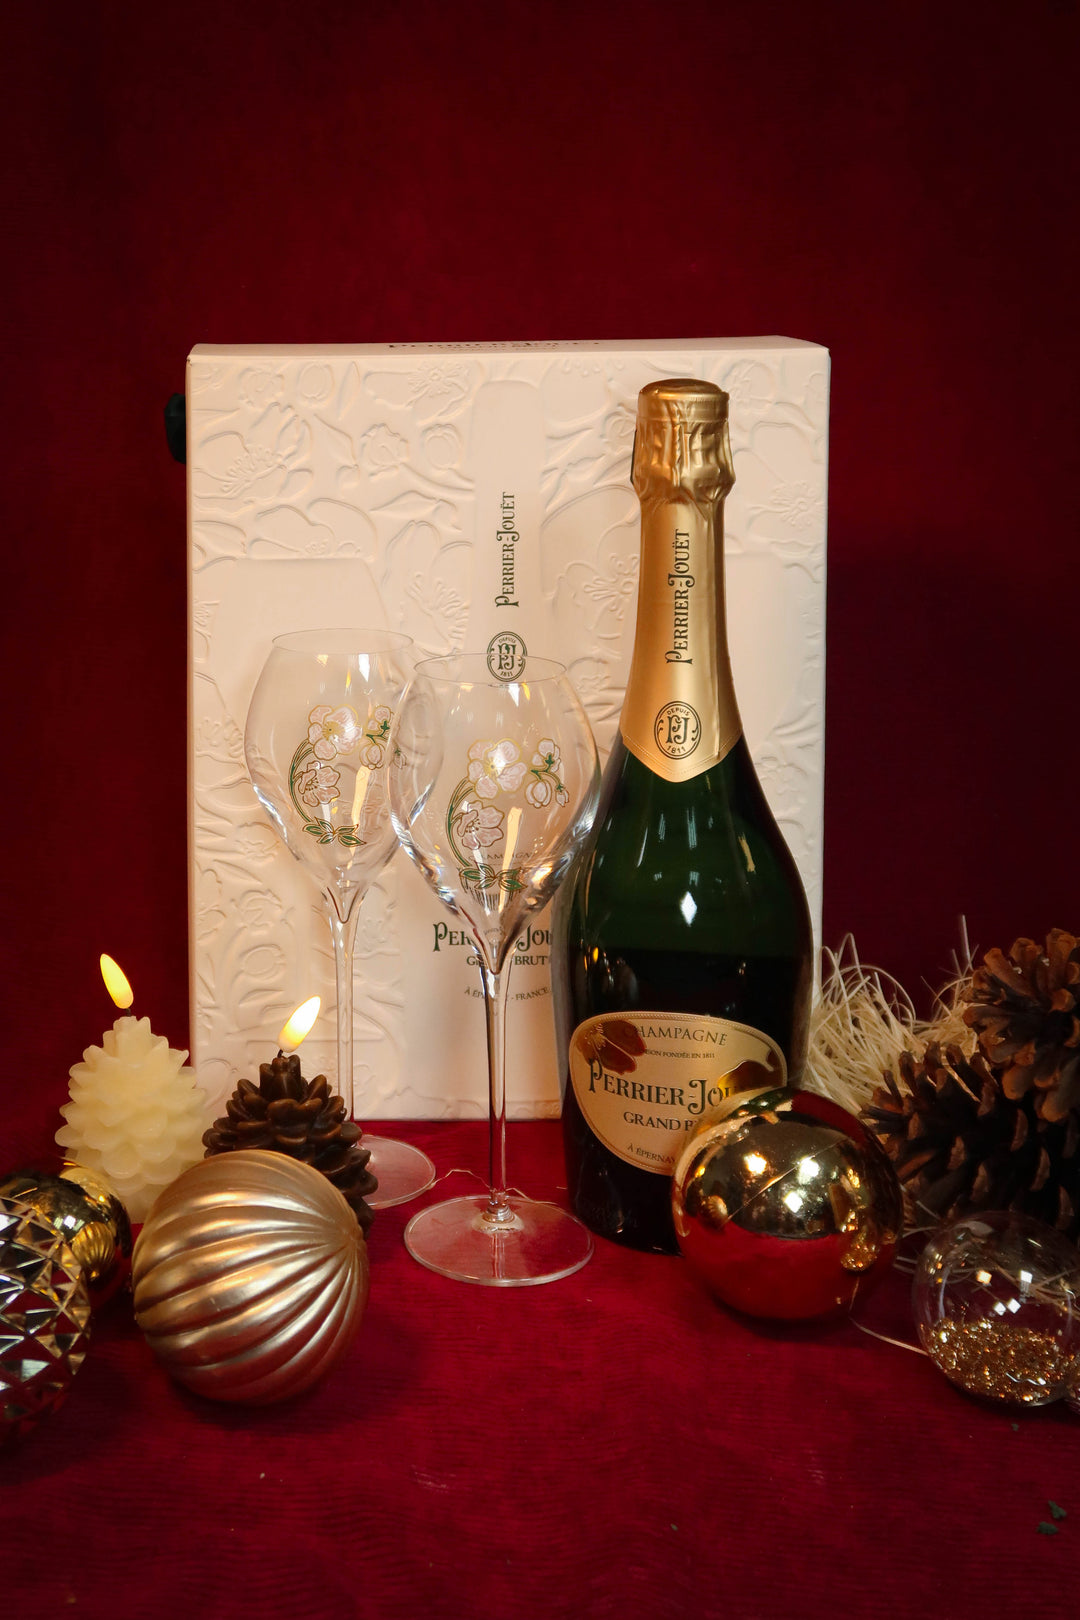 Add-on - Champagne - Perrier Jouet